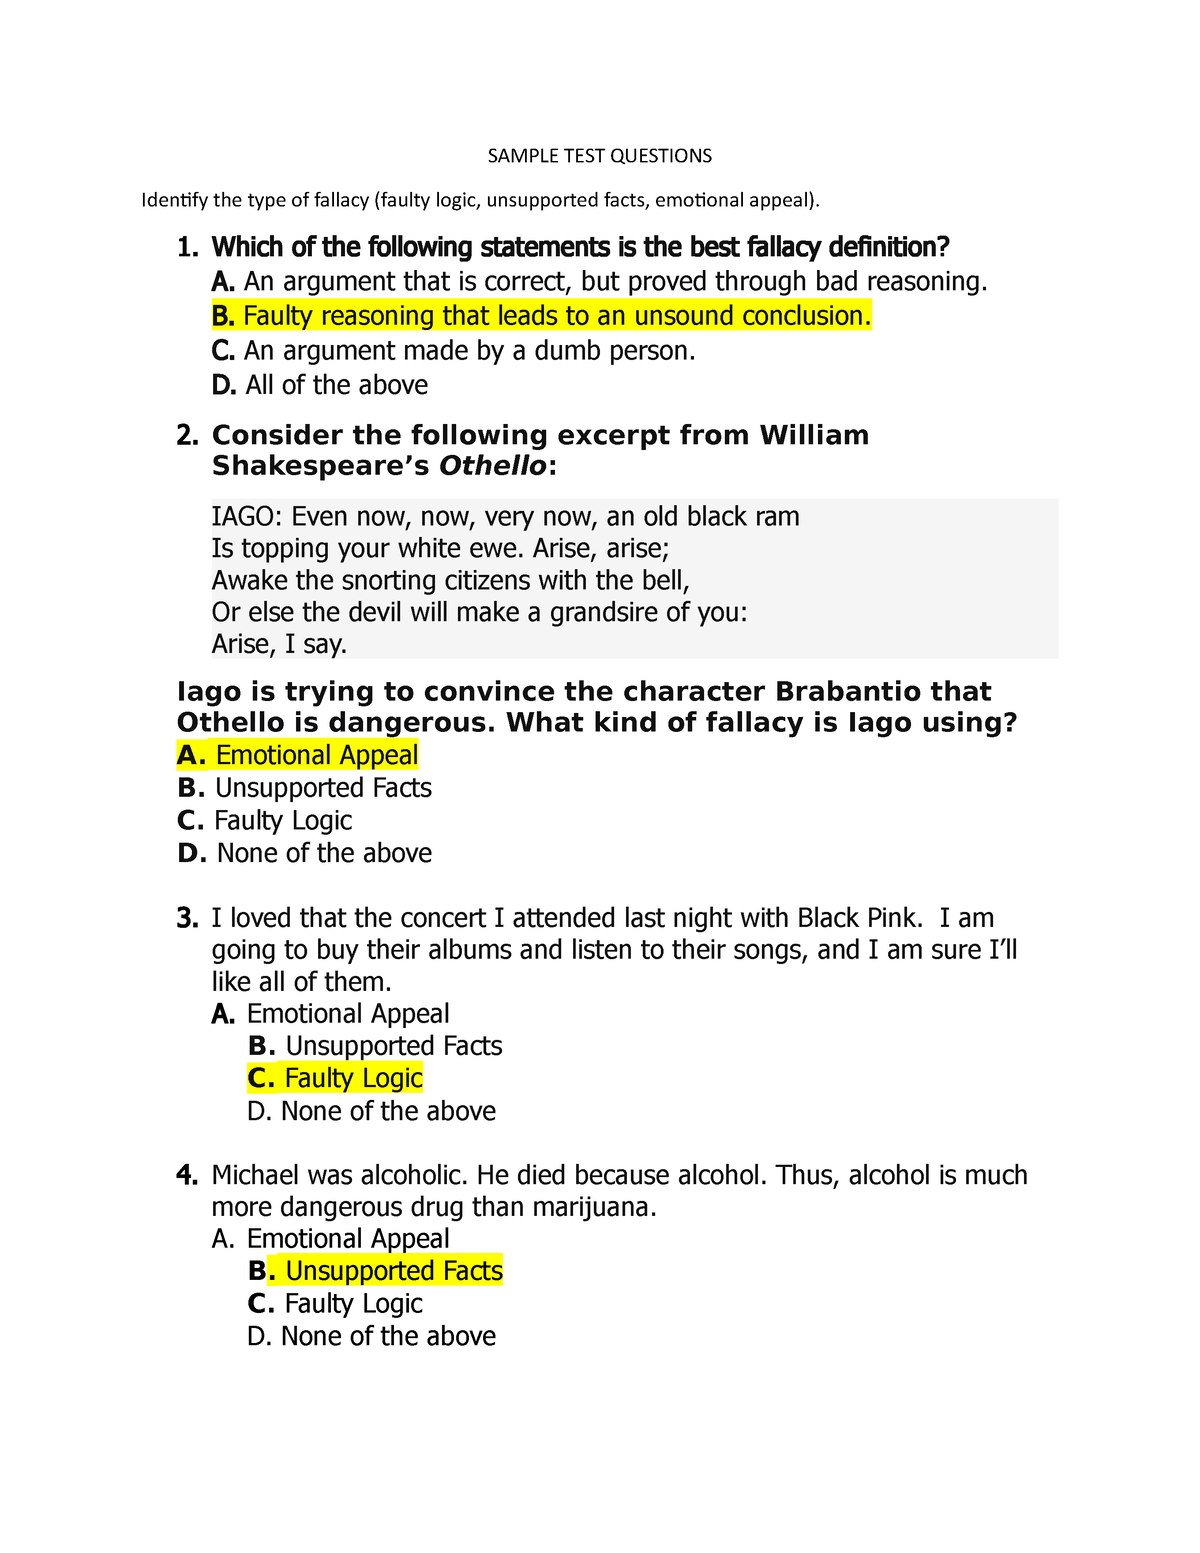 Sample Periodical Test - SAMPLE TEST QUESTIONS Identify the type of ...